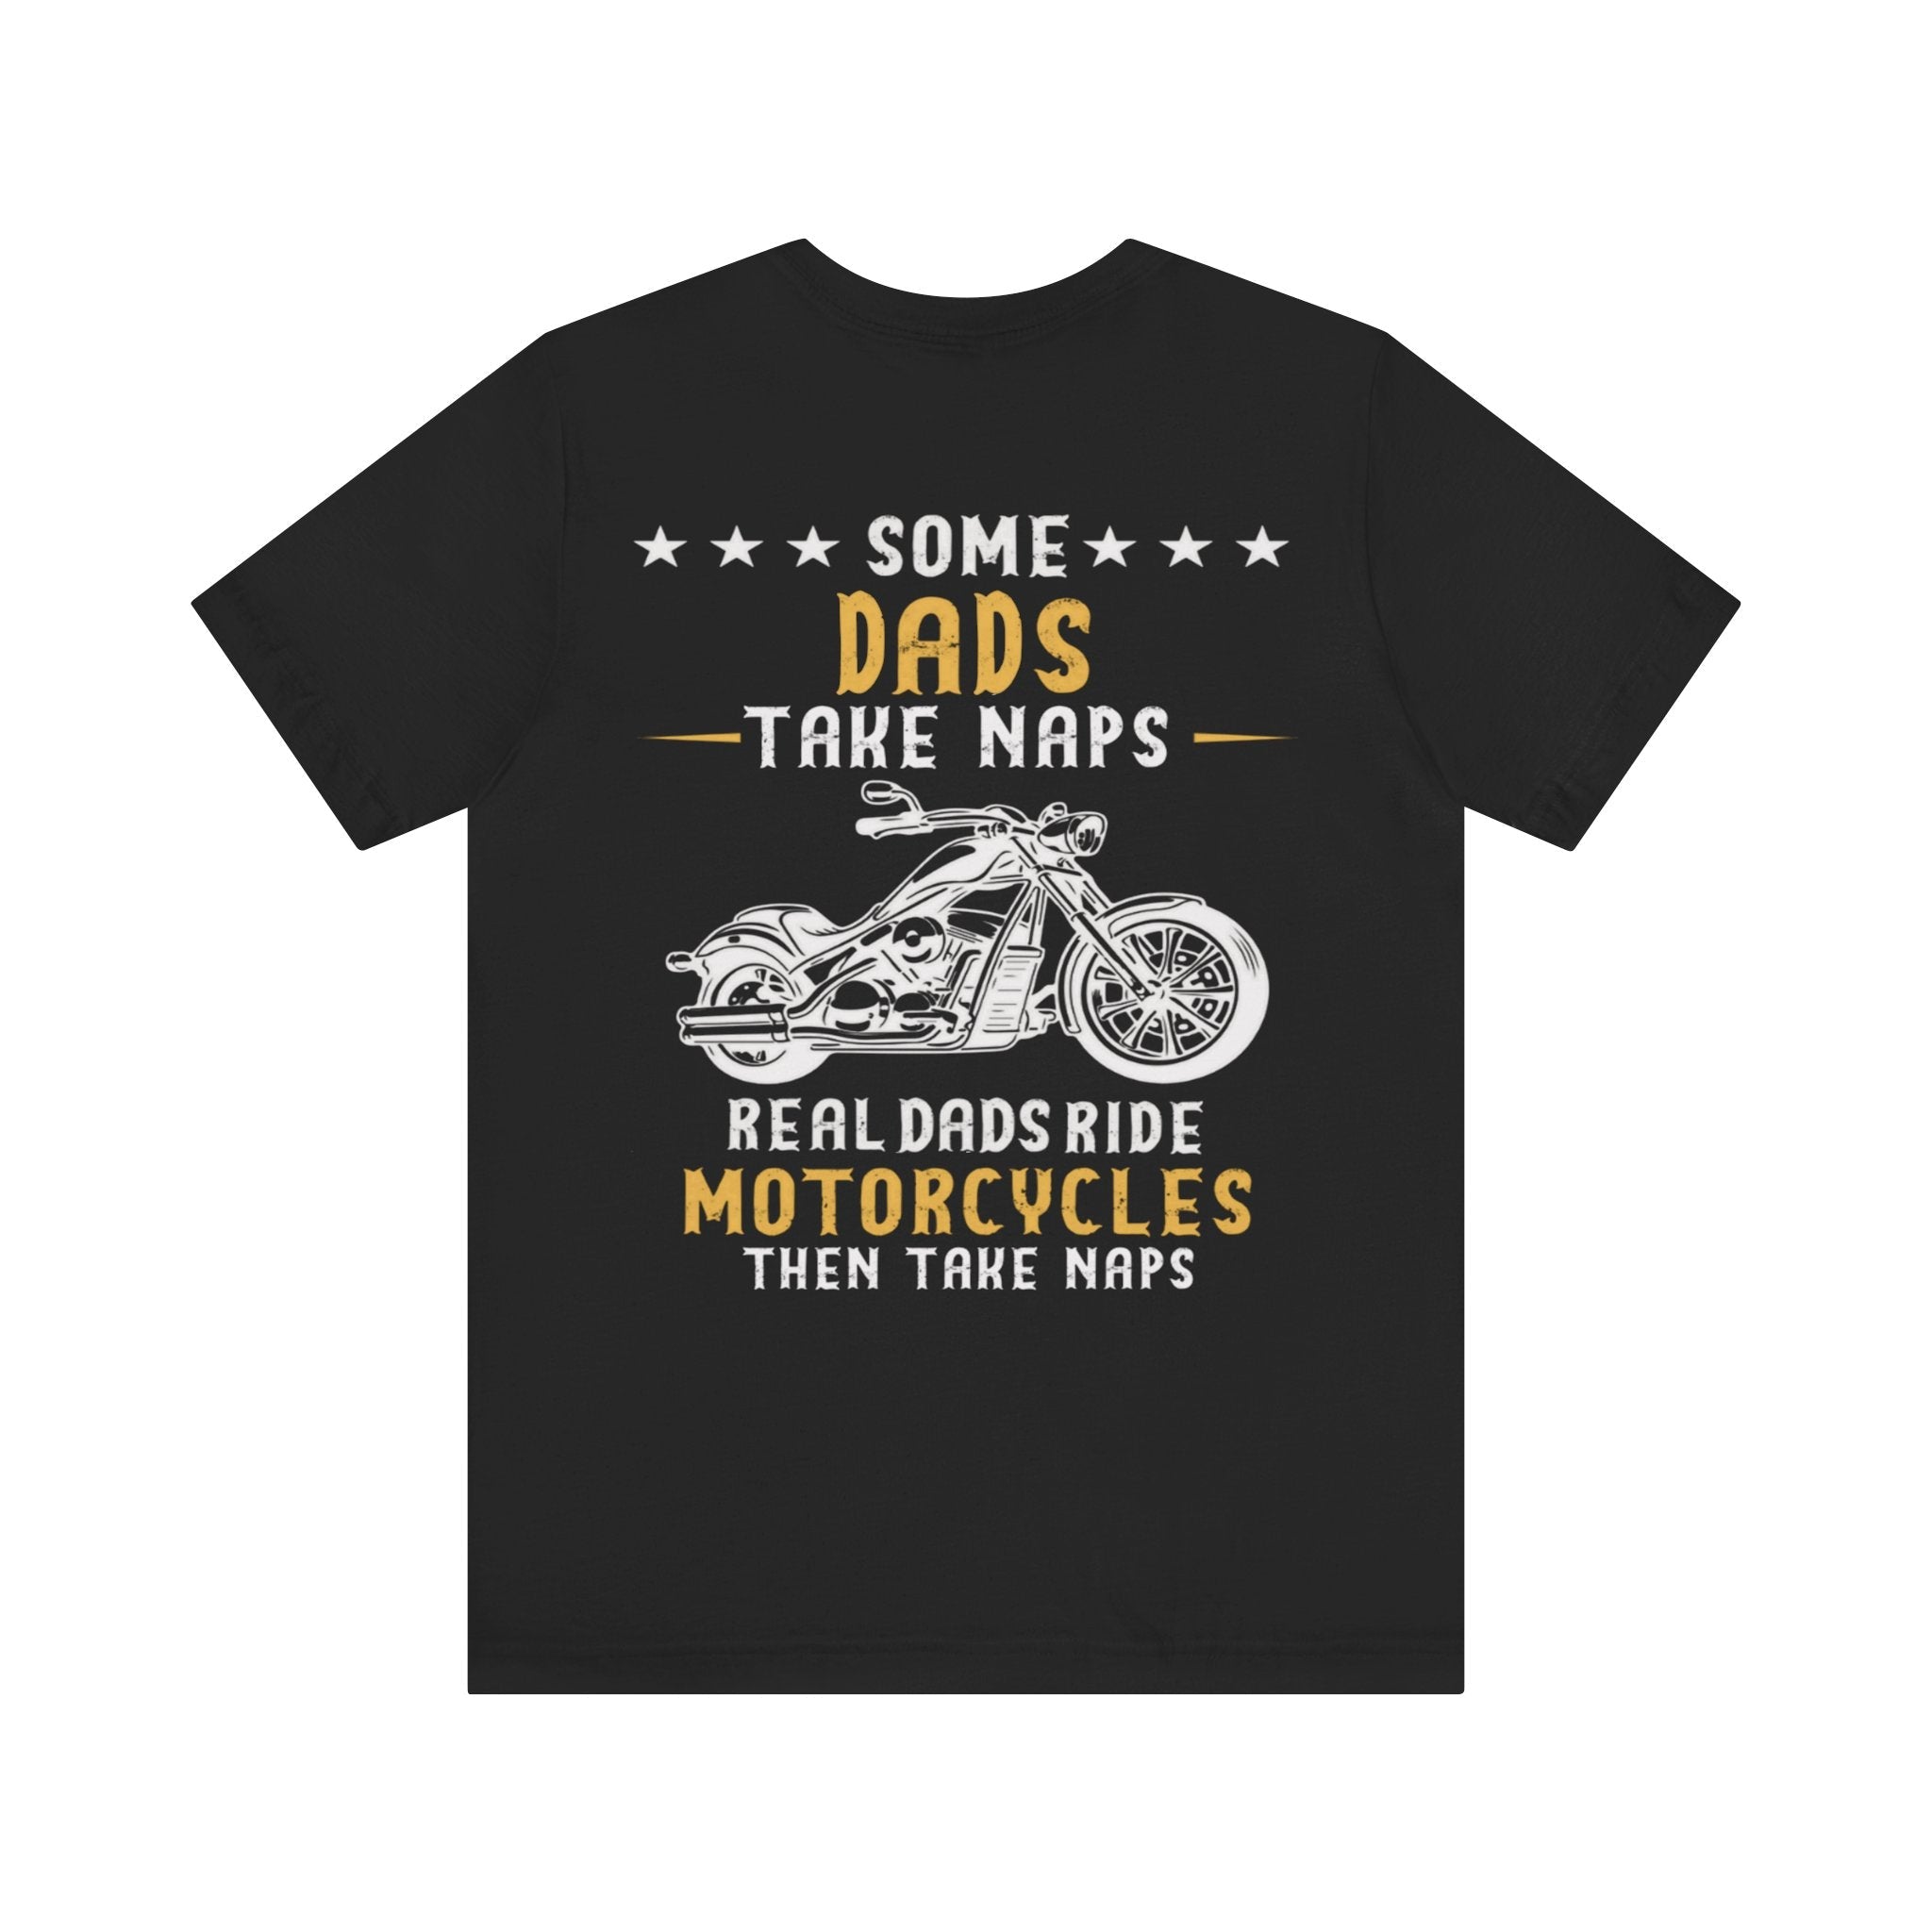 Kate McEnroe New York Biker Dad Shirt For Fathers day, Birthday Gift, Real Dads Ride Motorcycles Then Take Naps Shirt, Funny Biker Shirt, Dad GiftT - Shirt20242599022581551140